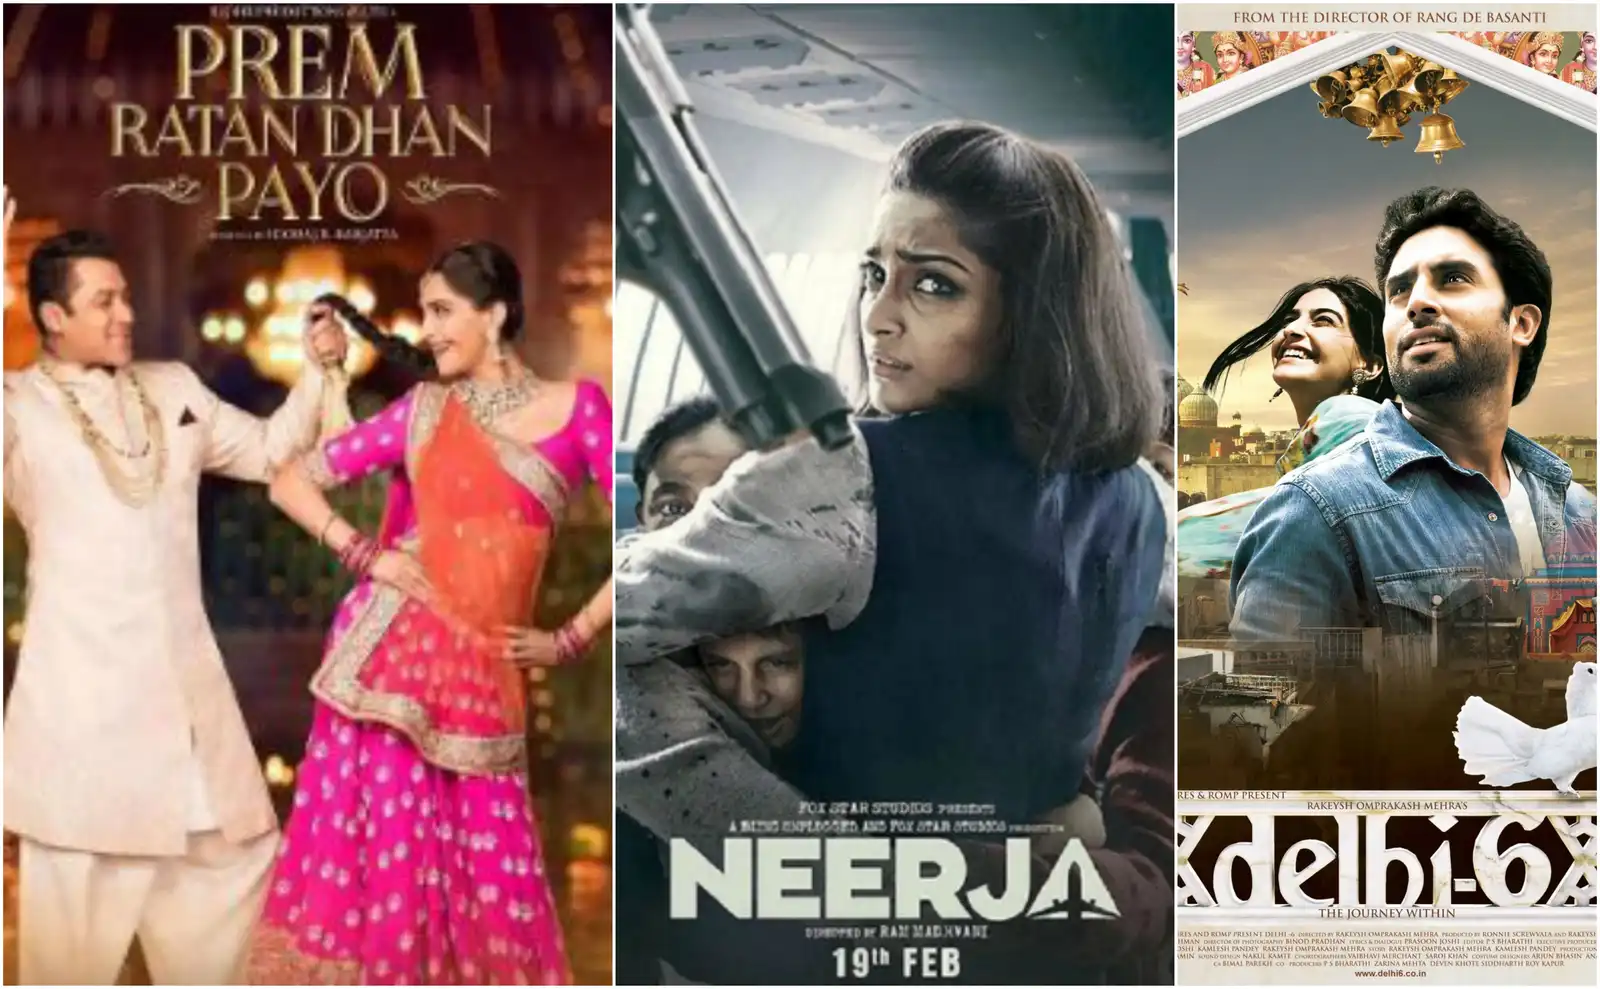 RANKED: Top 10 Films Of Sonam Kapoor Ranked According To Their Opening Day Collection